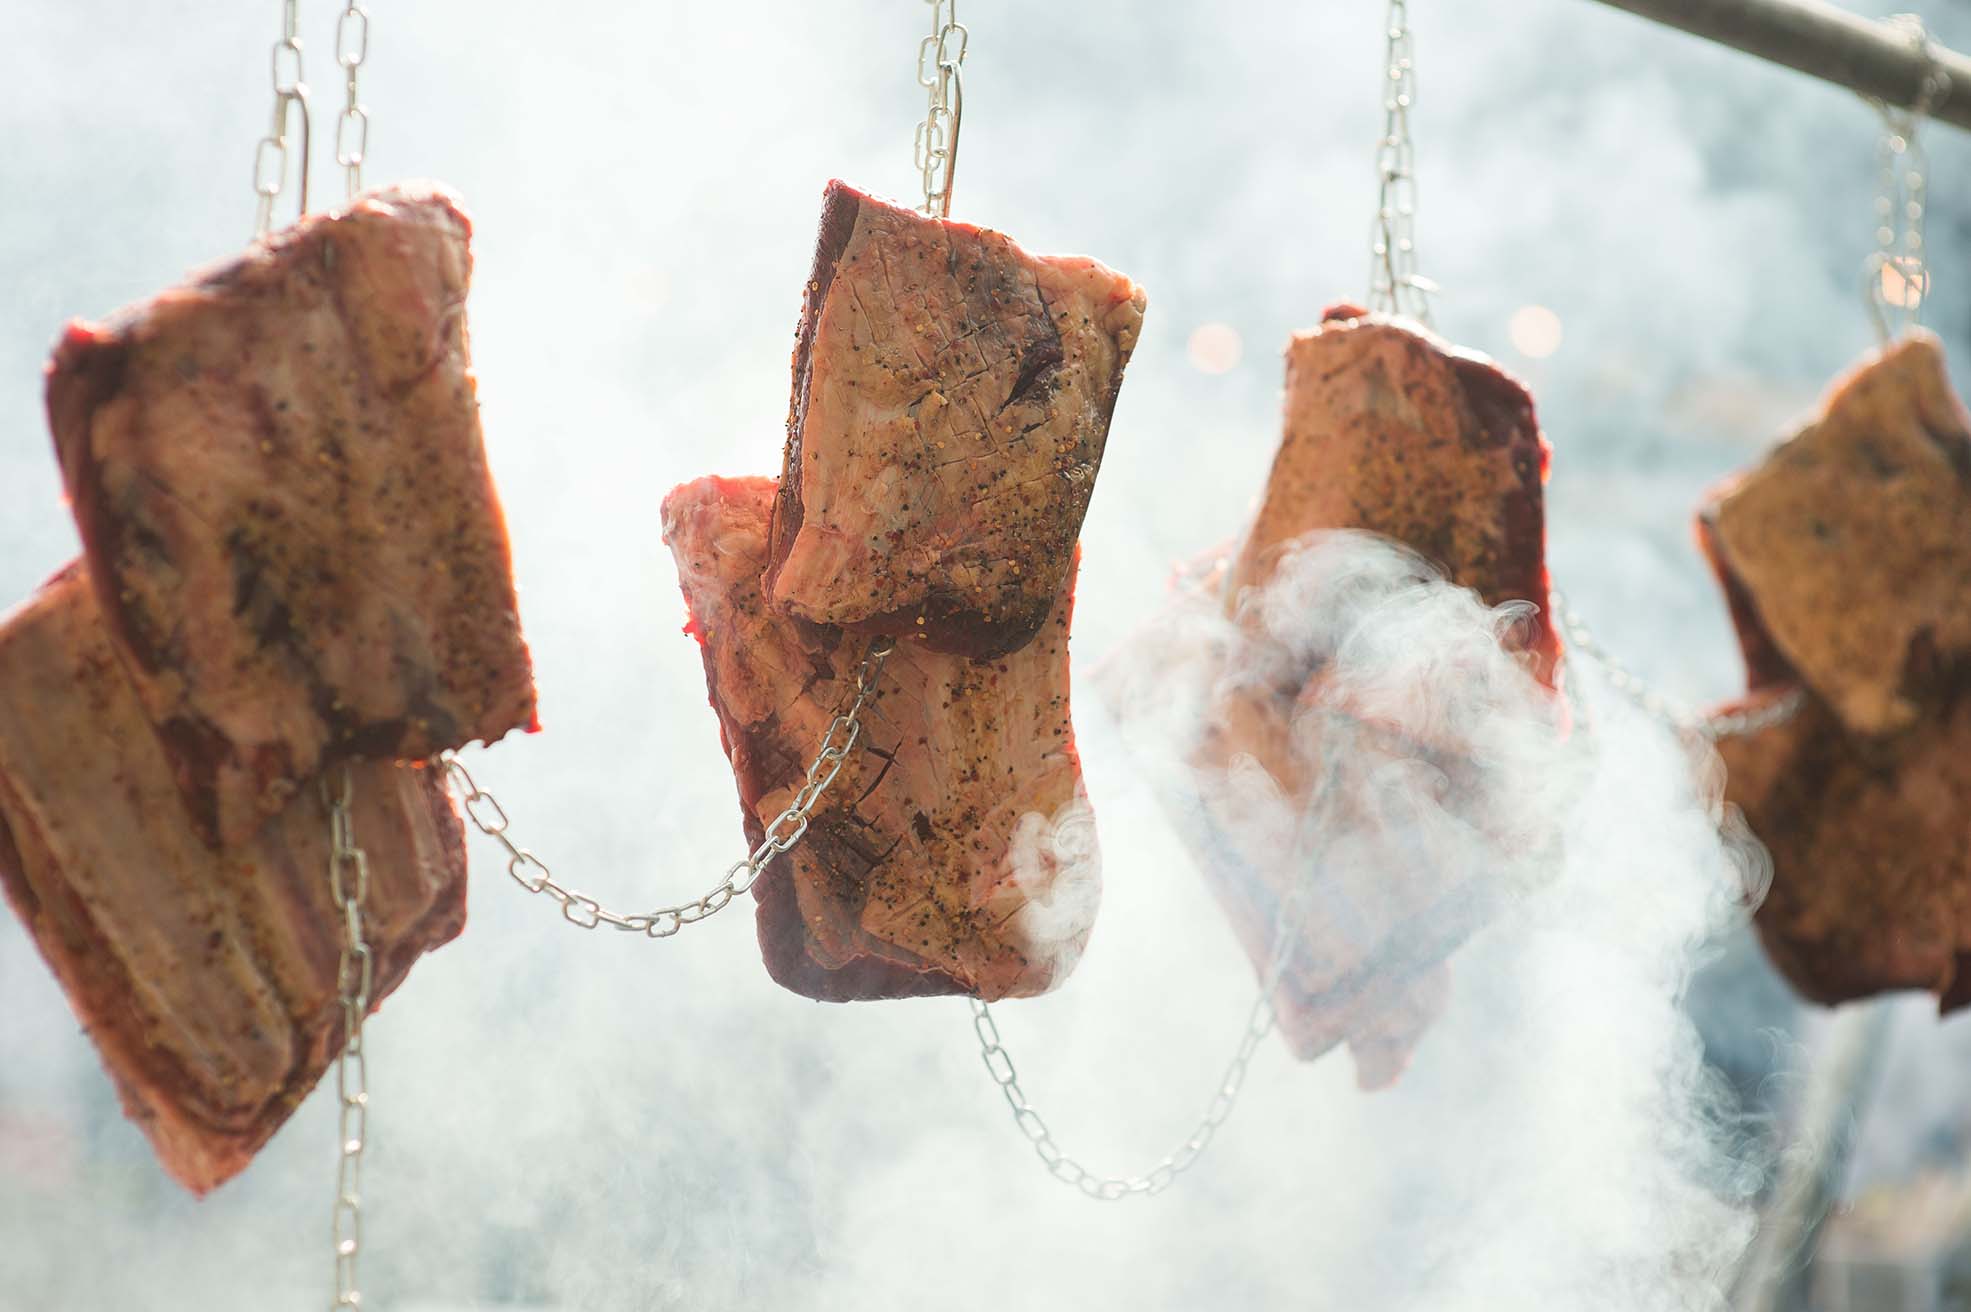 Hanging beef over fire at Meatopia UK 2018, a London food festival that dominated Instagram this week